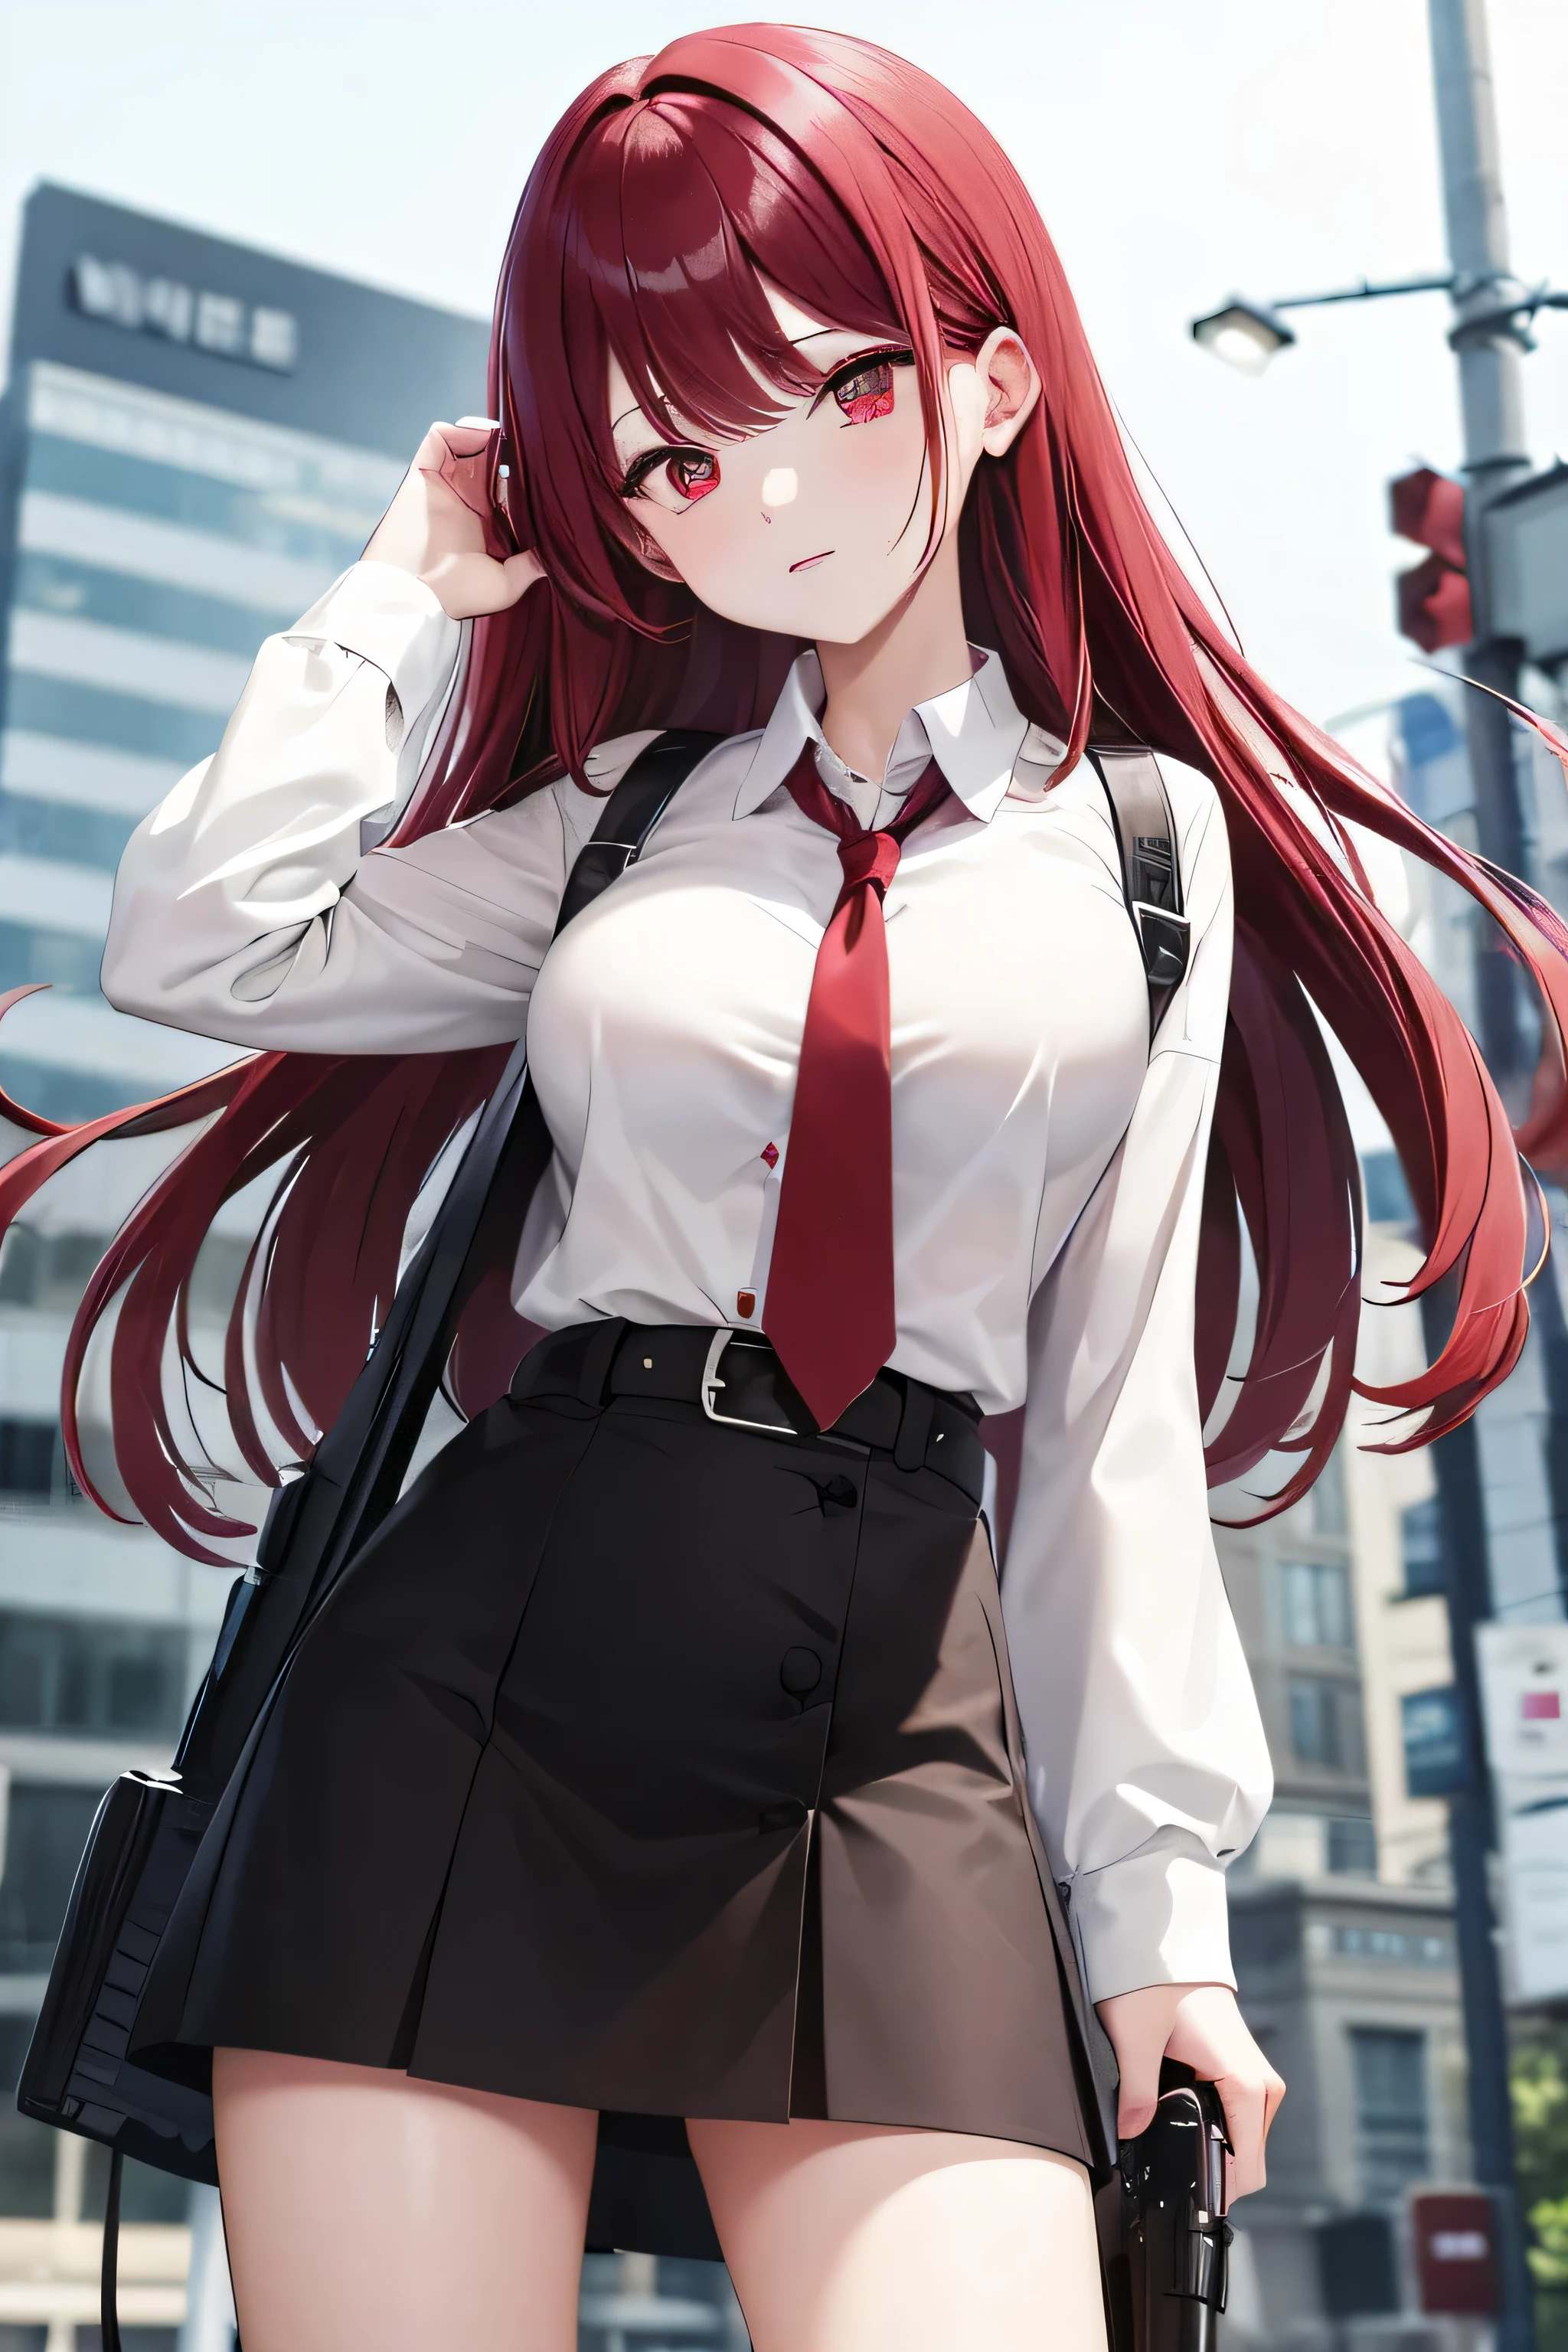 maroon hair, red eyes, white shirt with buttons, black skirt, large breast, city backround, gun in hand